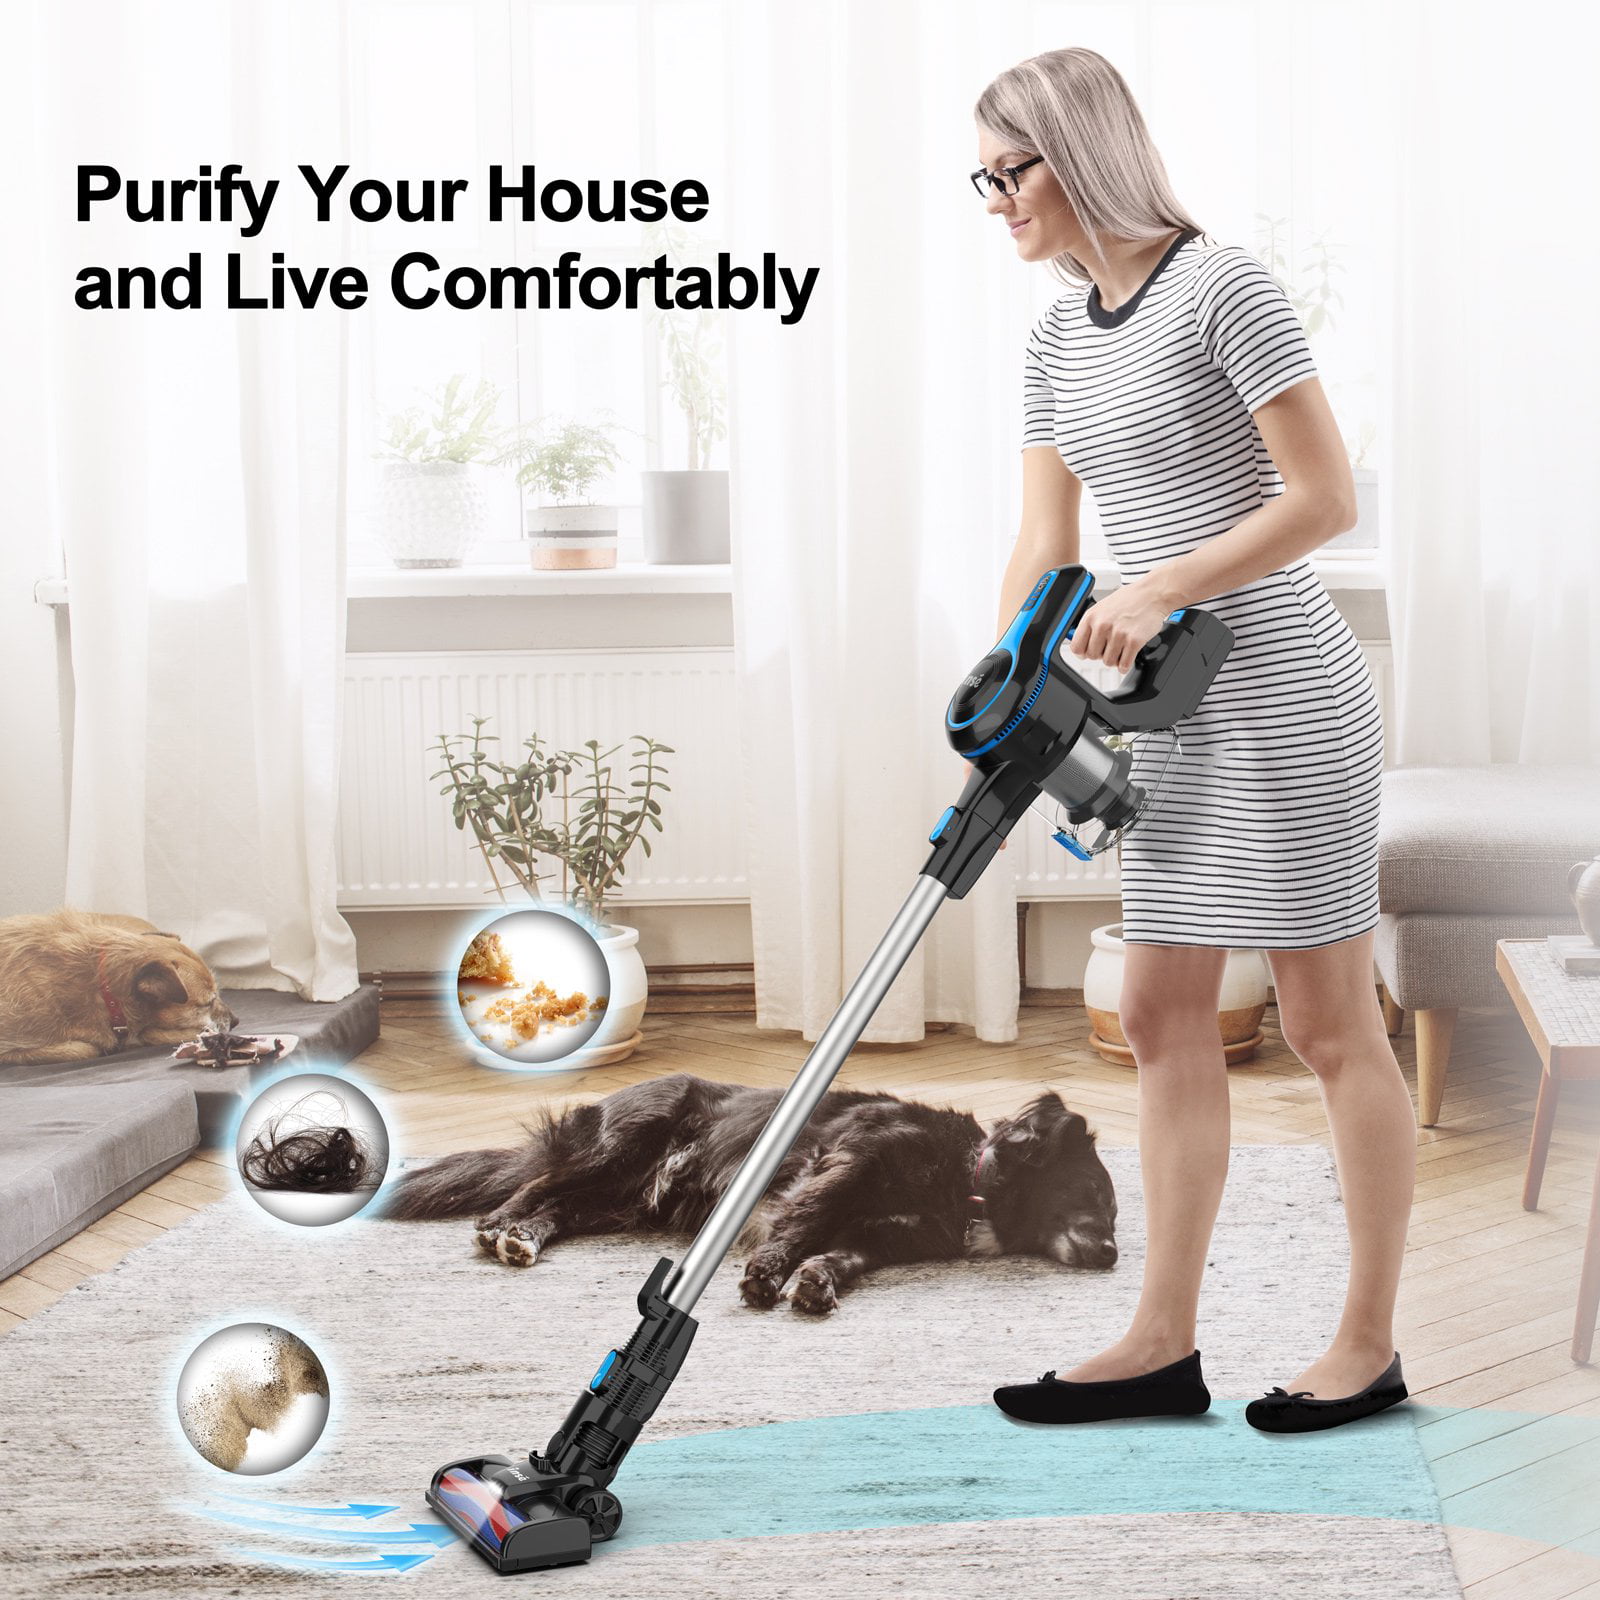 INSE Cordless Vacuum Cleaner, 6-in-1 Rechargeable Stick Vacuum with 2200 mAh Battery, Powerful Lightweight Vacuum Cleaner, Up to 45 Mins Runtime, for Home Hard Floor Carpet Pet Hair - 1